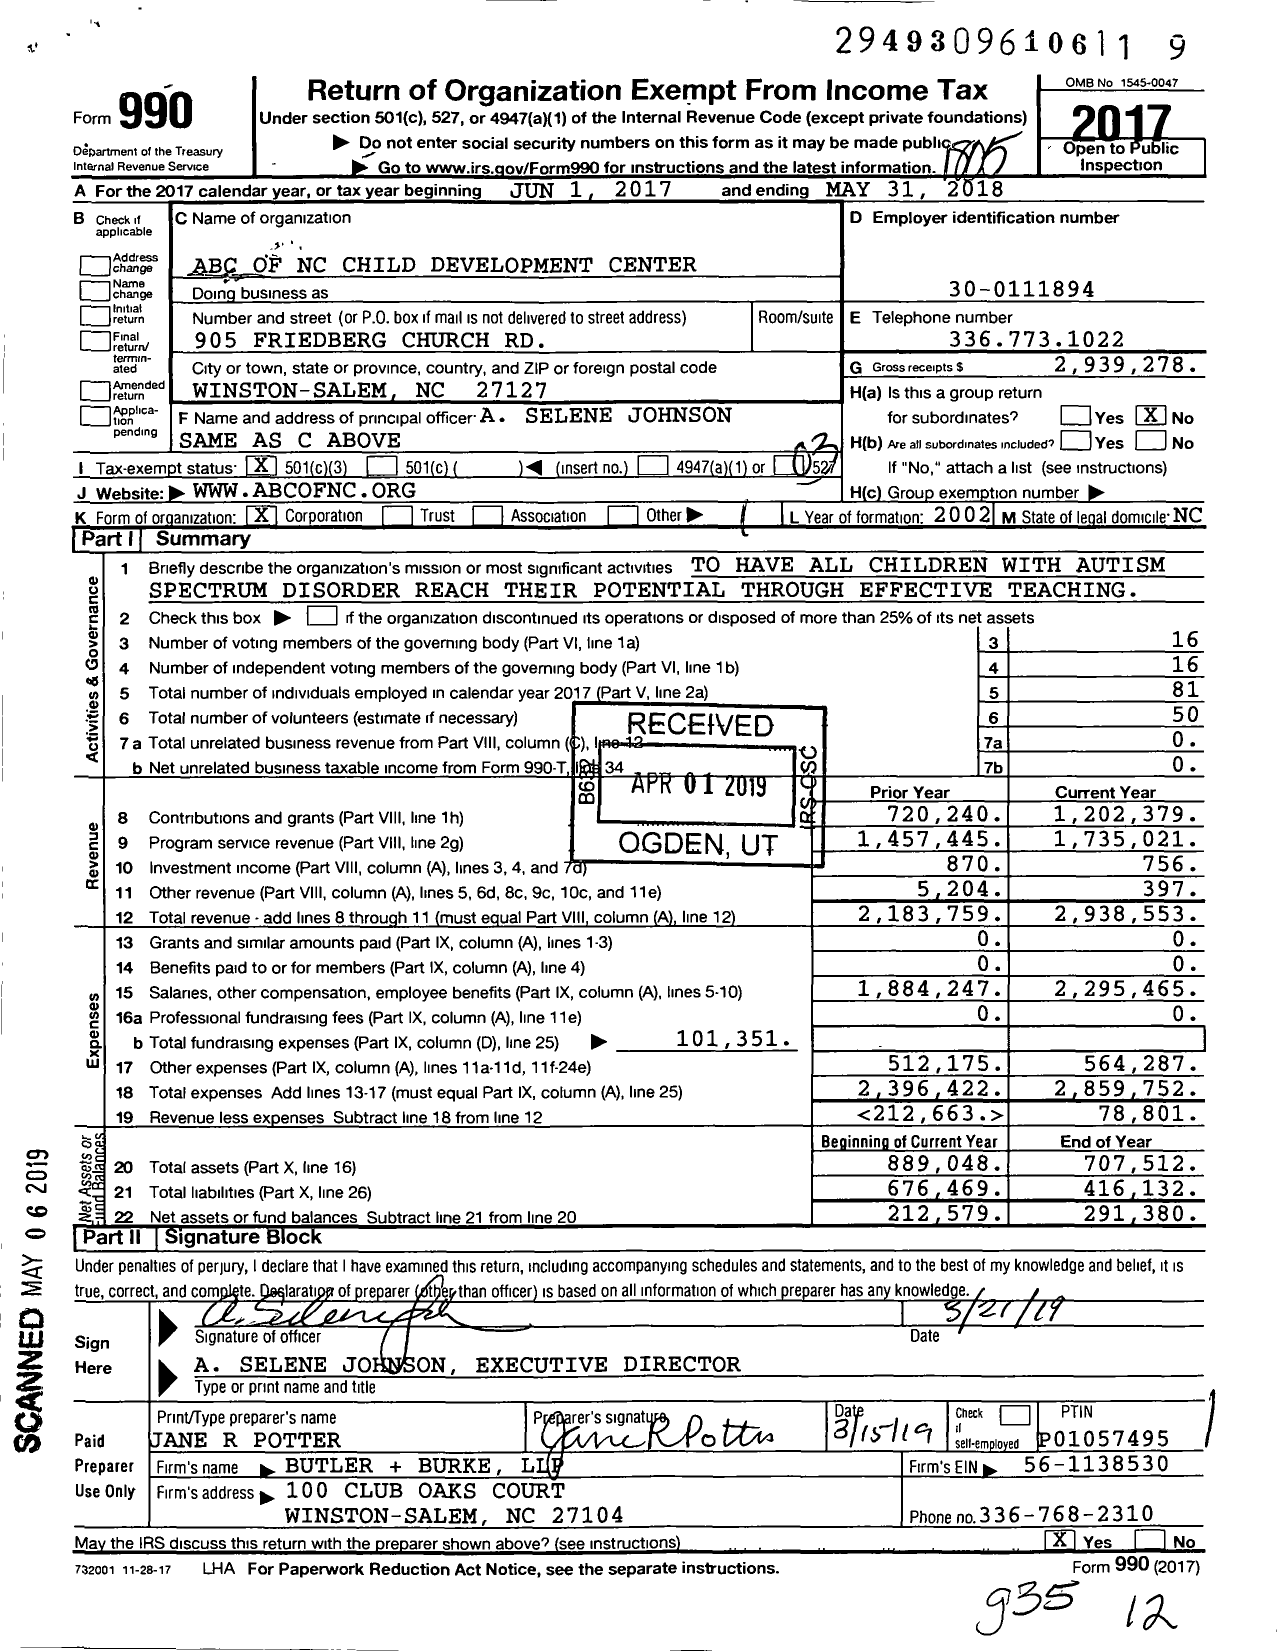 Image of first page of 2017 Form 990 for ABC of NC Child Development Center